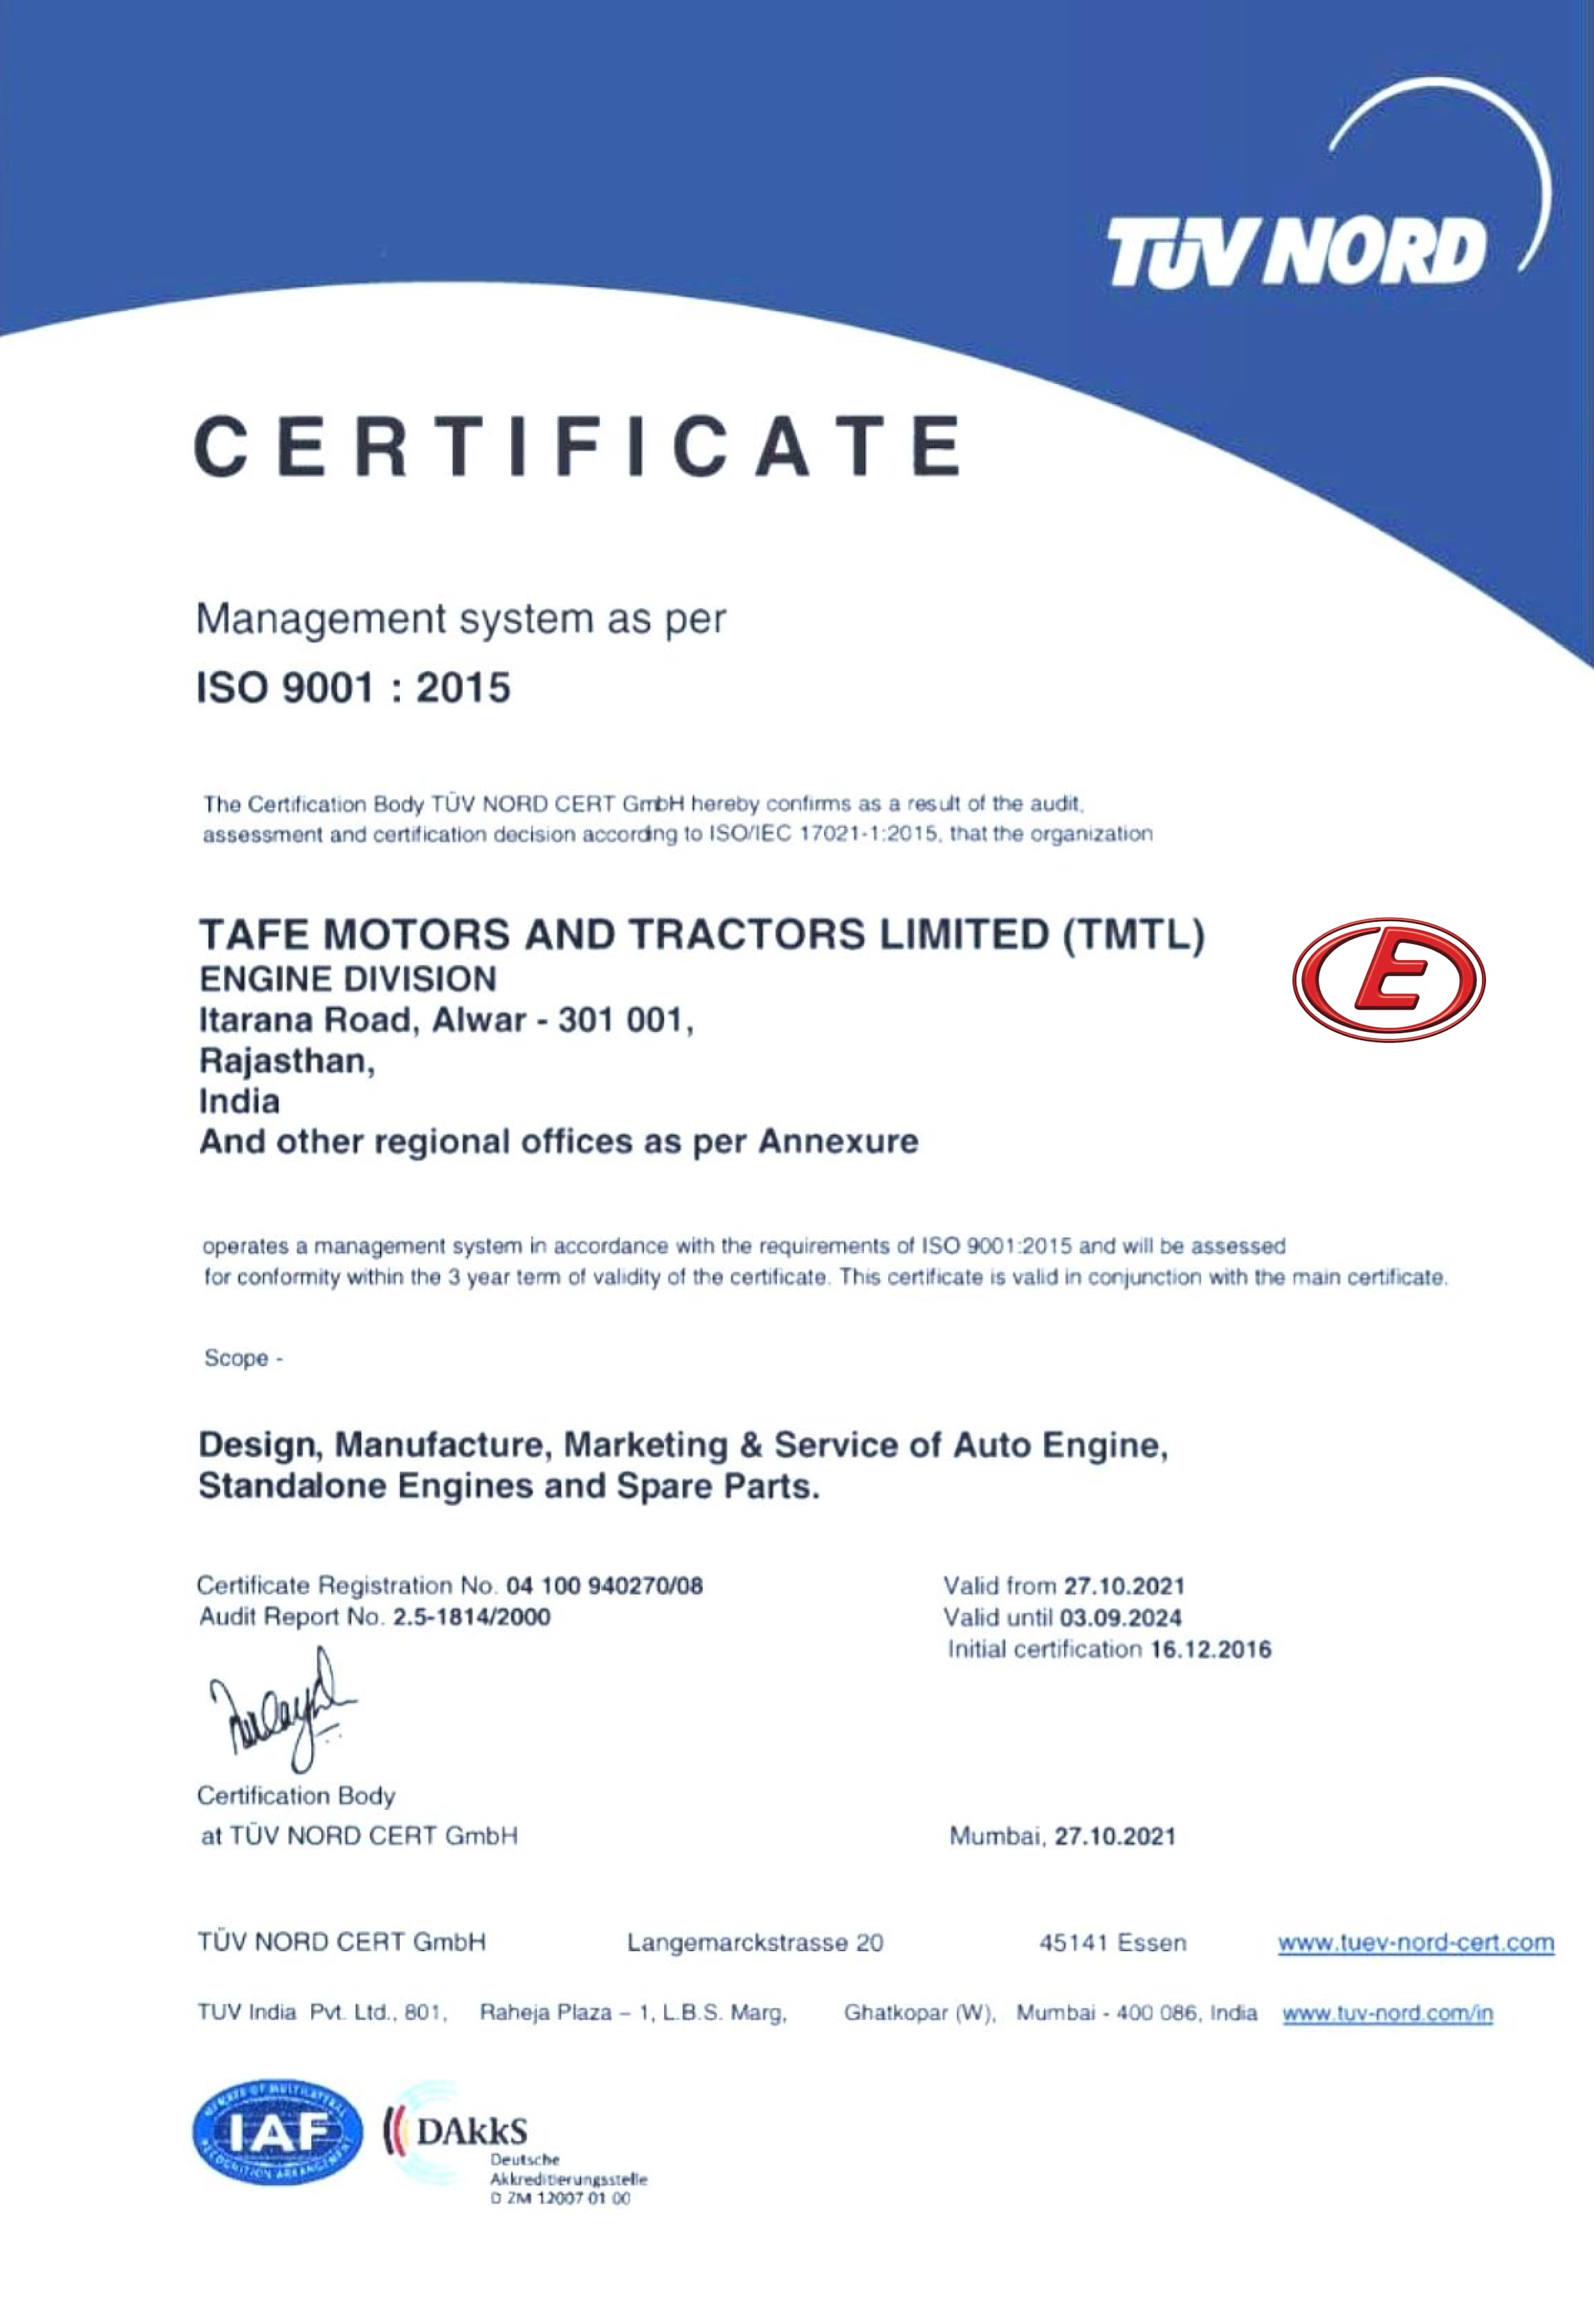 Tafe power ISO 9001 certified for powerful engine